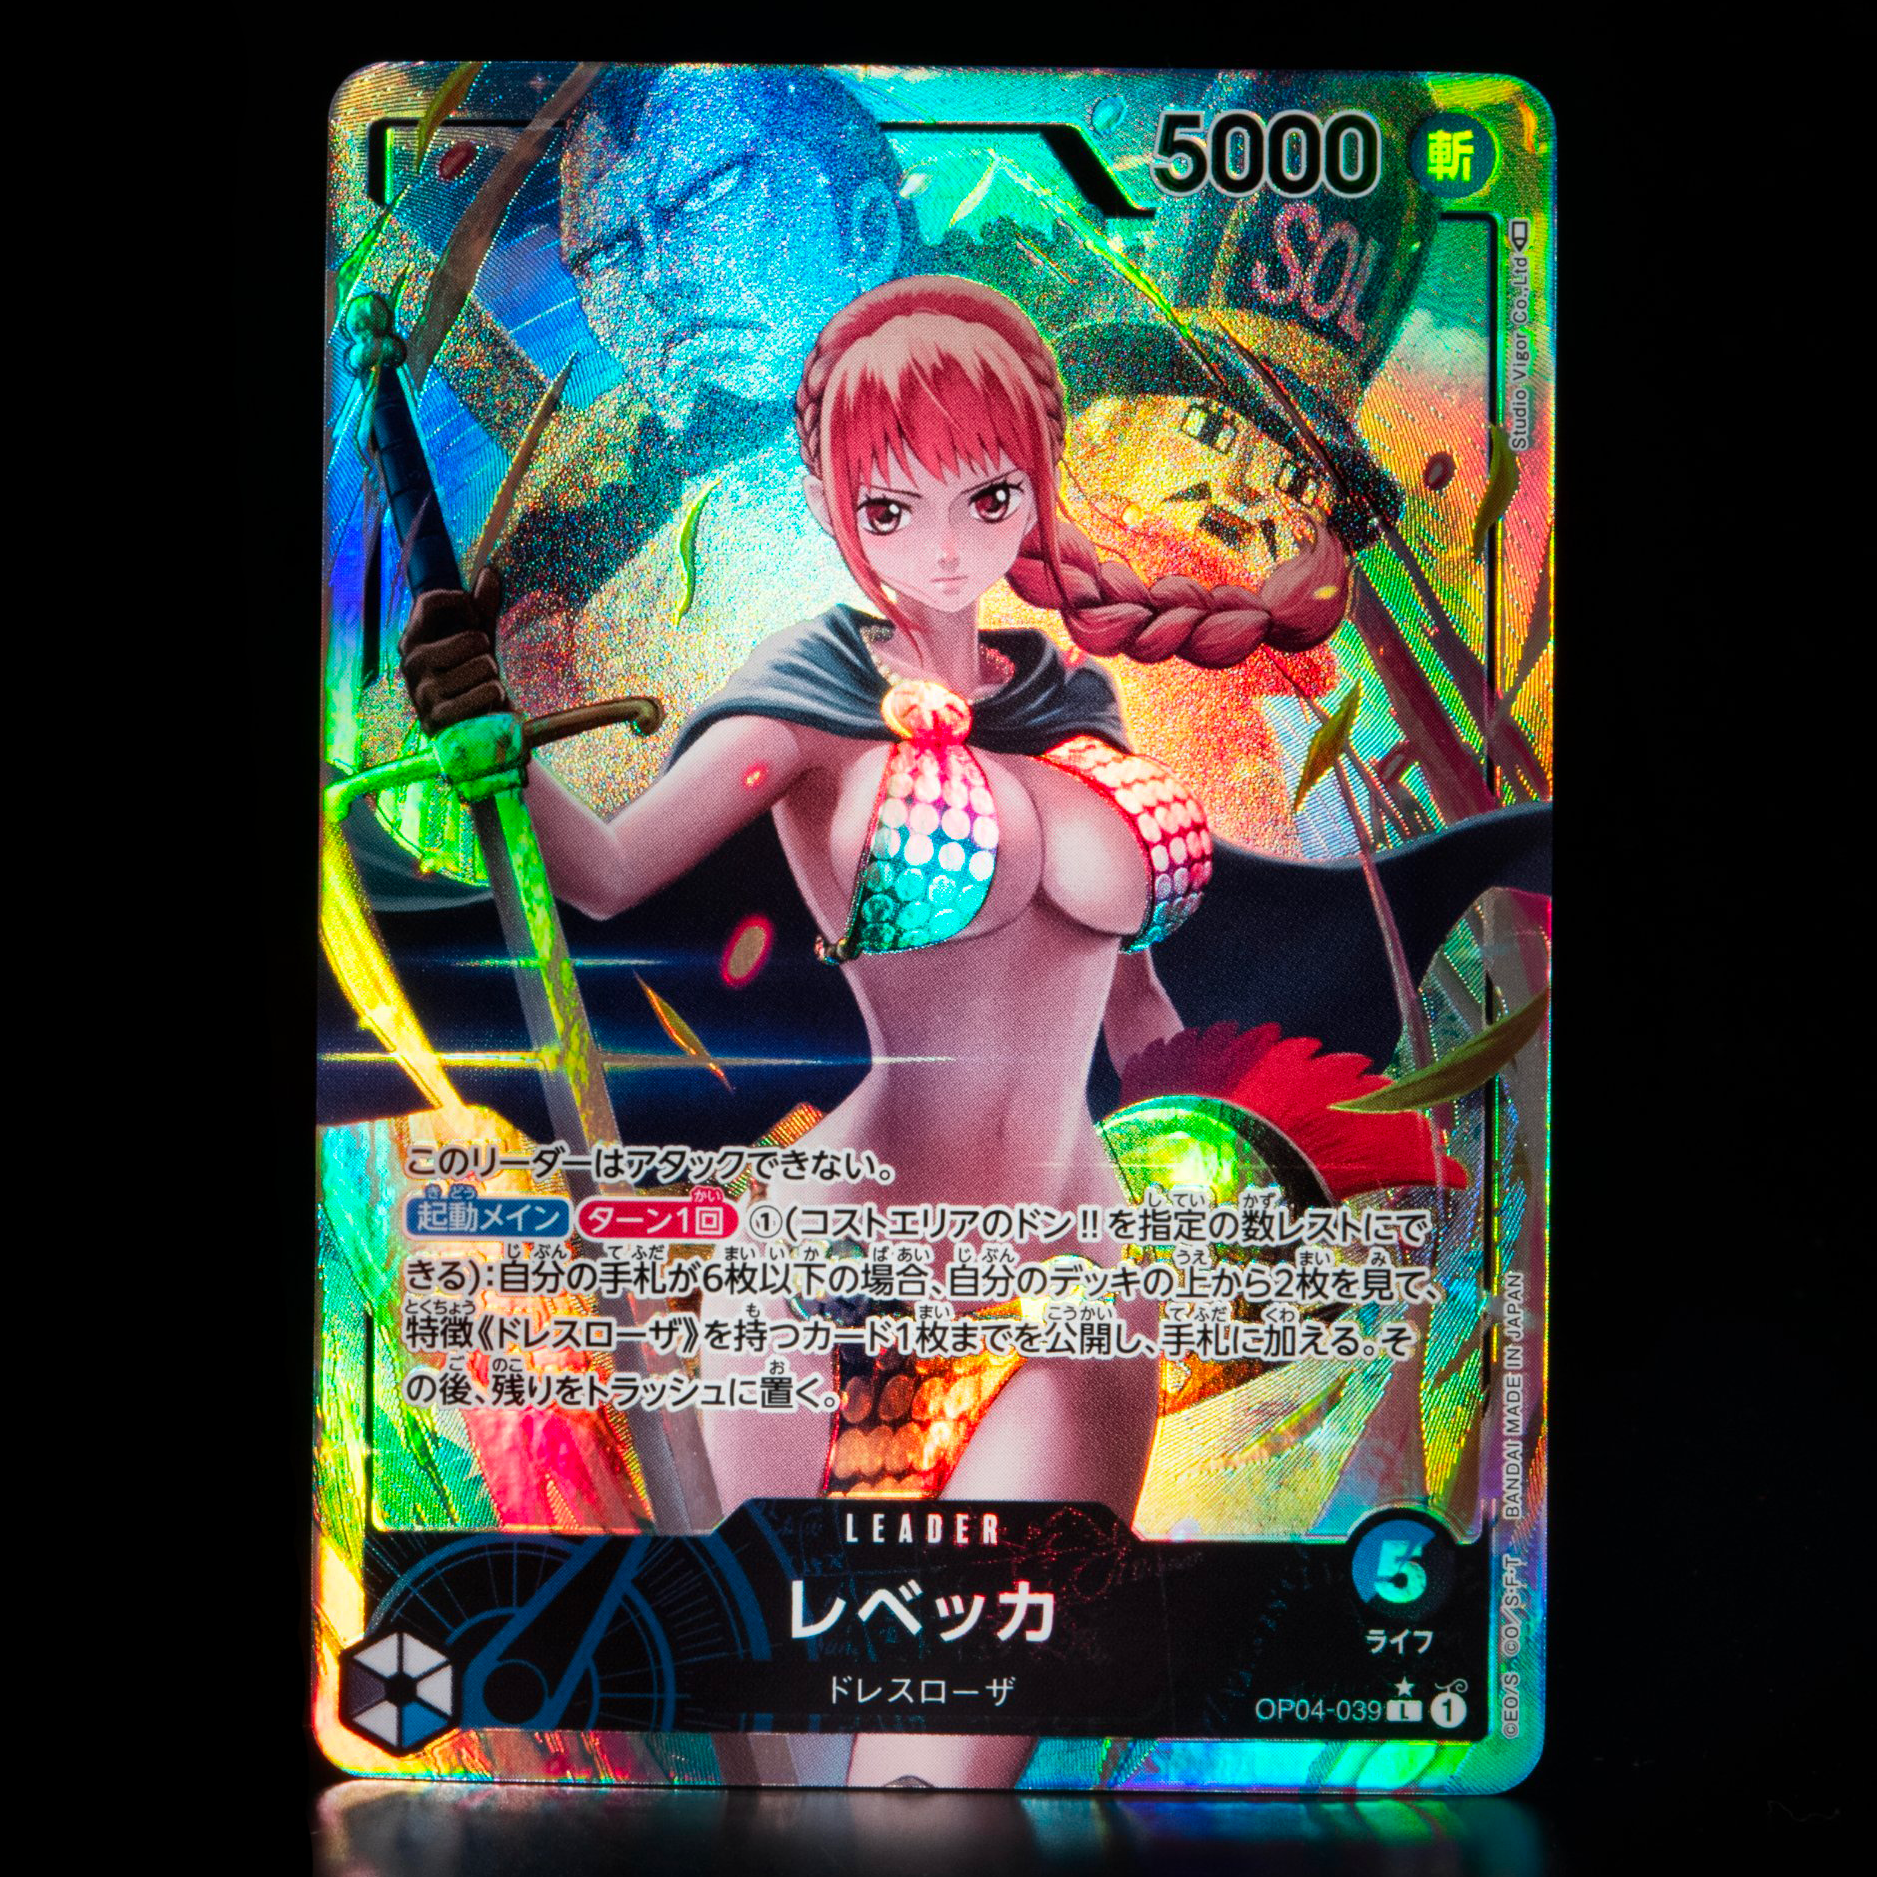 ONE PIECE CARD GAME ｢Kingdoms of Intrigue｣  ONE PIECE CARD GAME OP04-039 Leader Parallel card  Rebecca